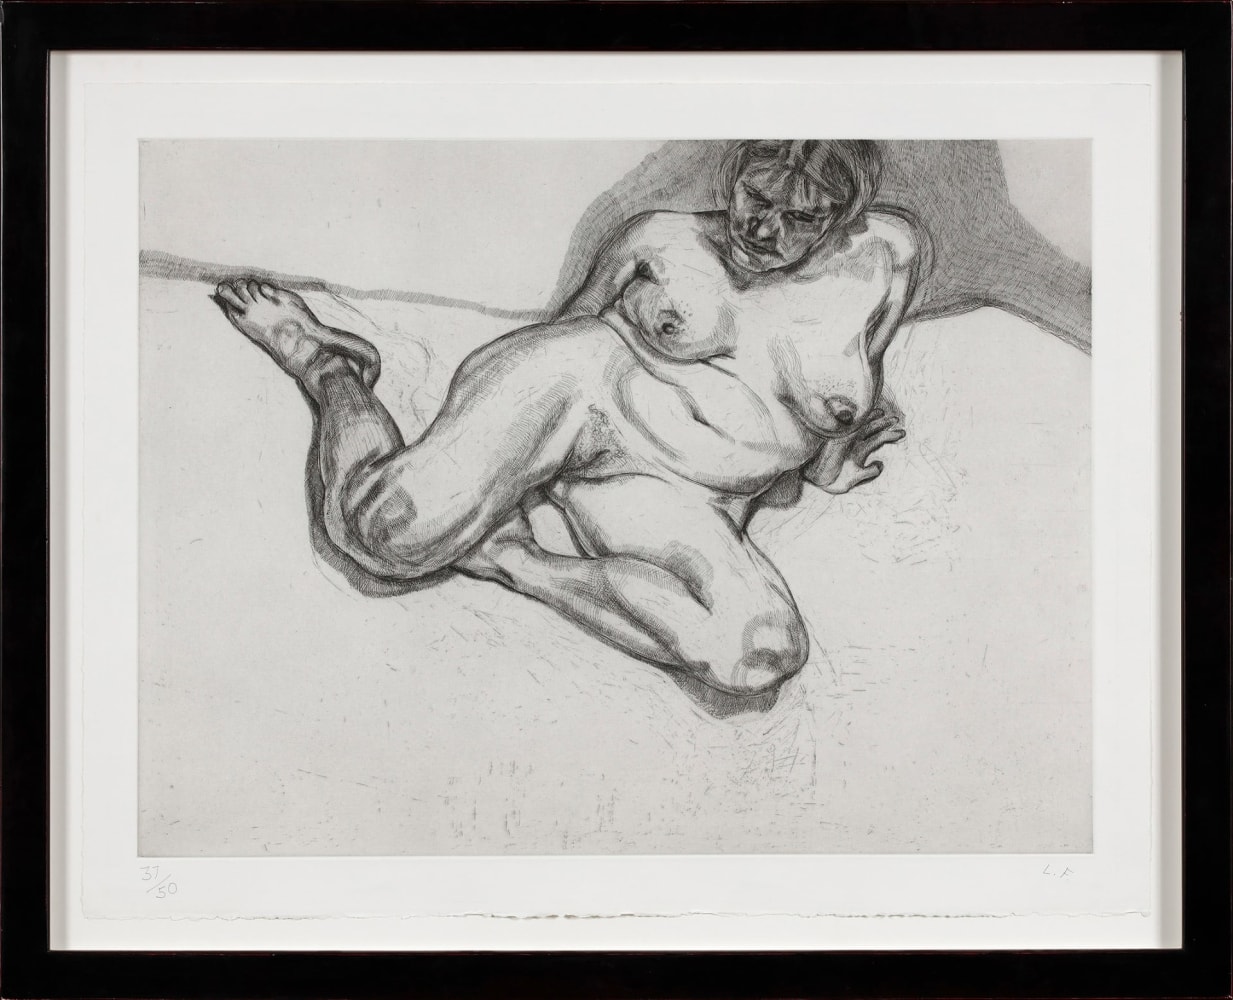 Lucian Freud

Girl Sitting, 1987

etching on Somerset satin white paper, ed. of 50

27 x 32 1/4 in. / 68.6 x 81.9 cm